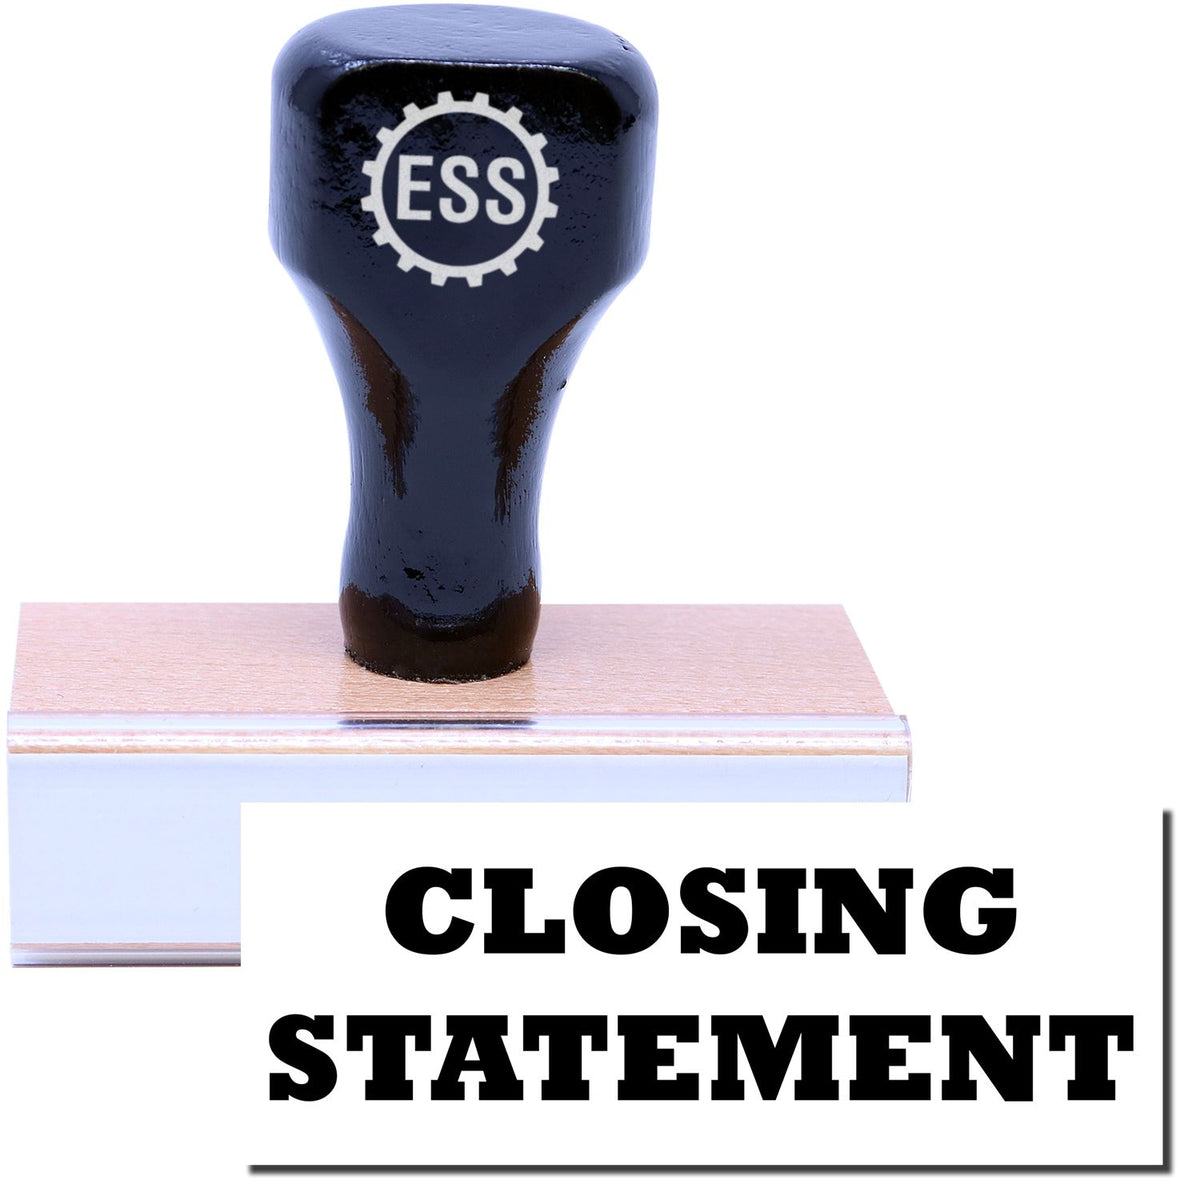 A stock office rubber stamp with a stamped image showing how the text &quot;CLOSING STATEMENT&quot; in a large font is displayed after stamping.